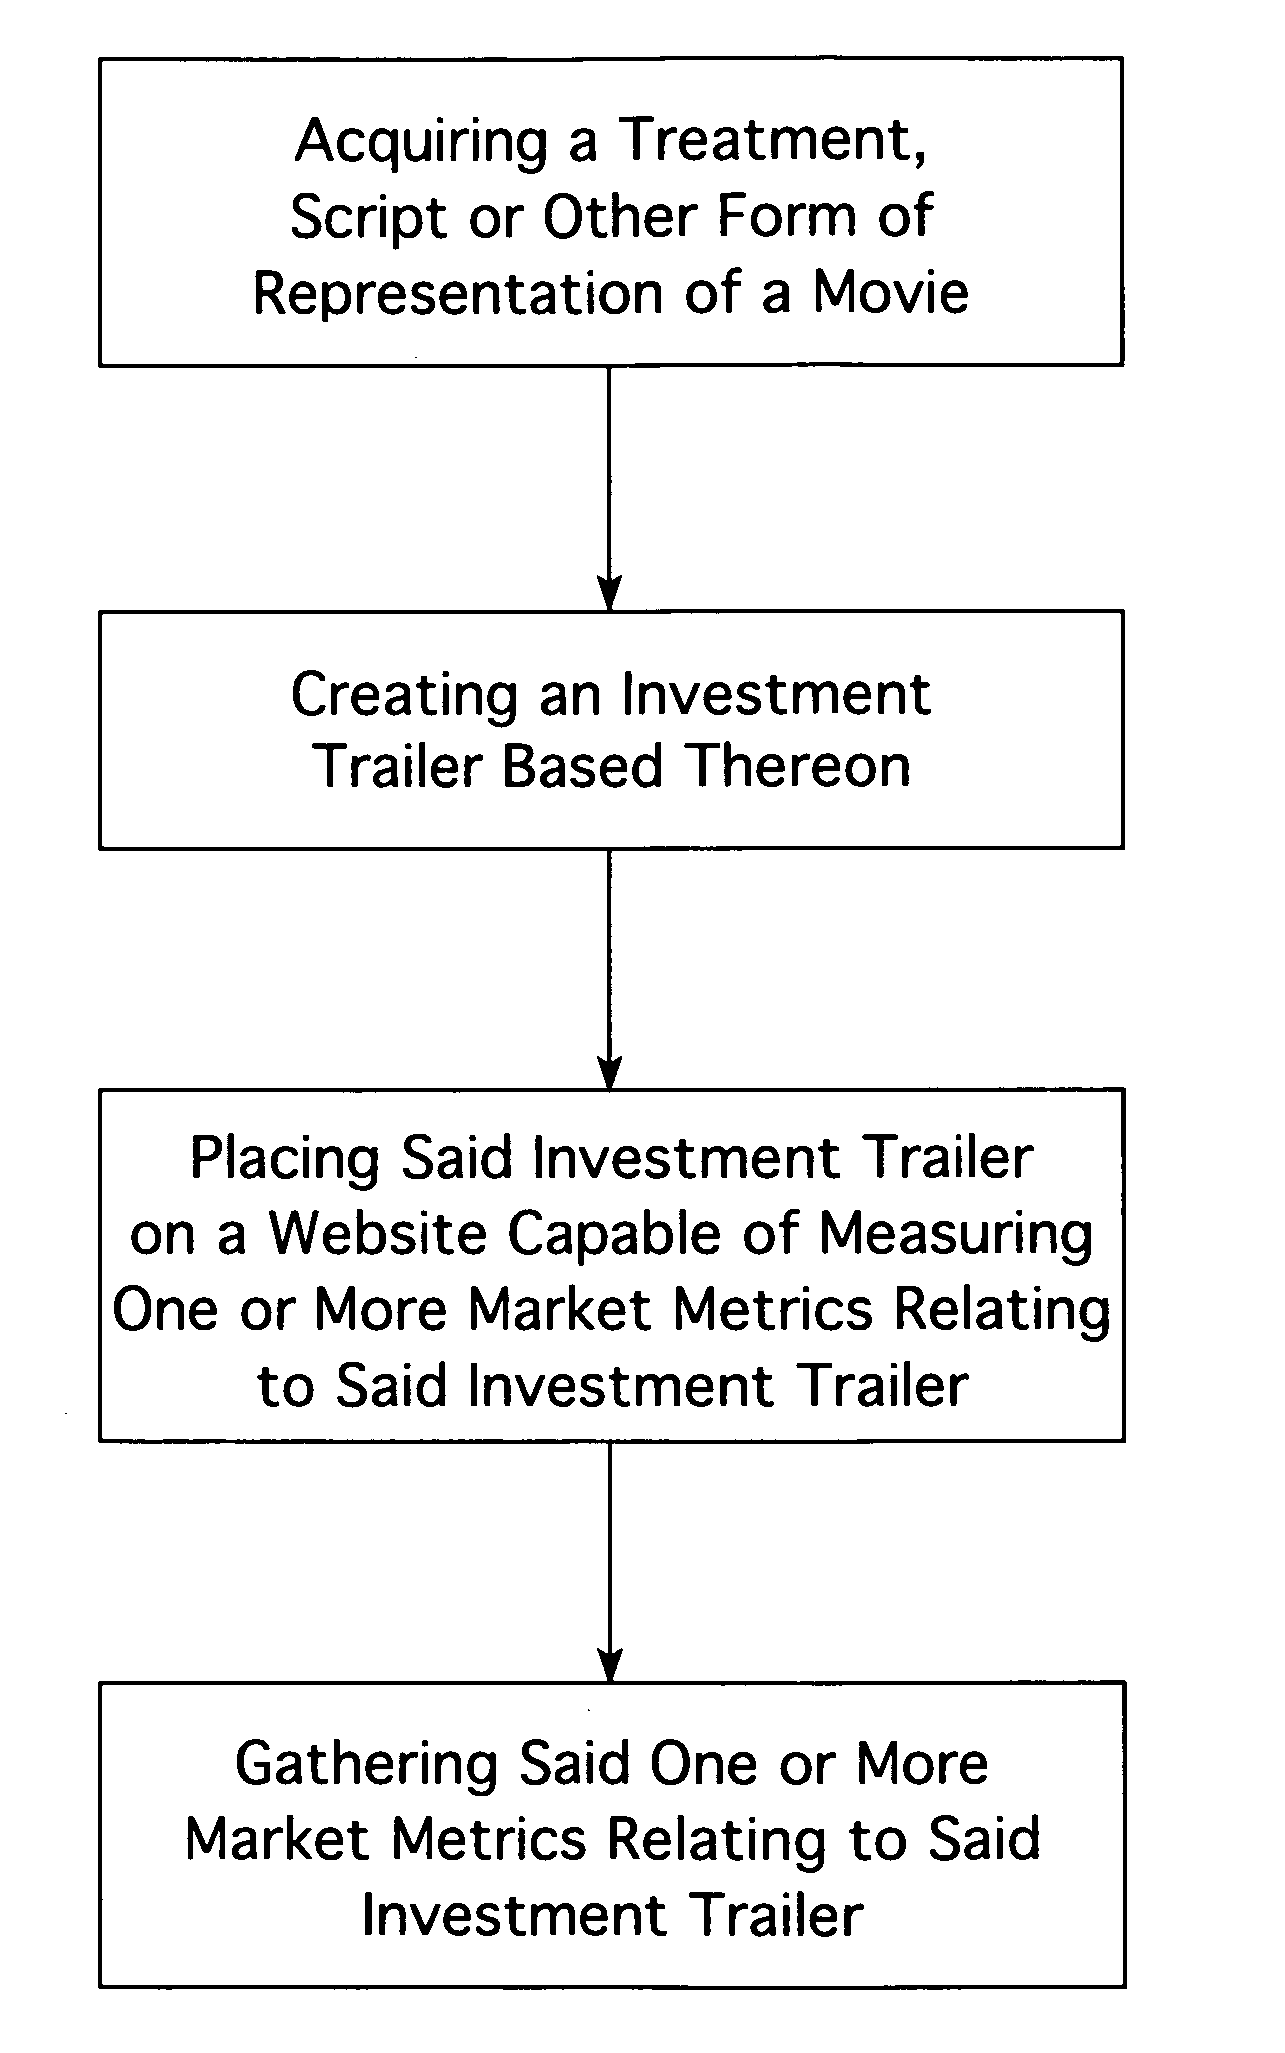 Method for quantifying the relative value of movies prior to spending substantial amounts of money on full production thereof